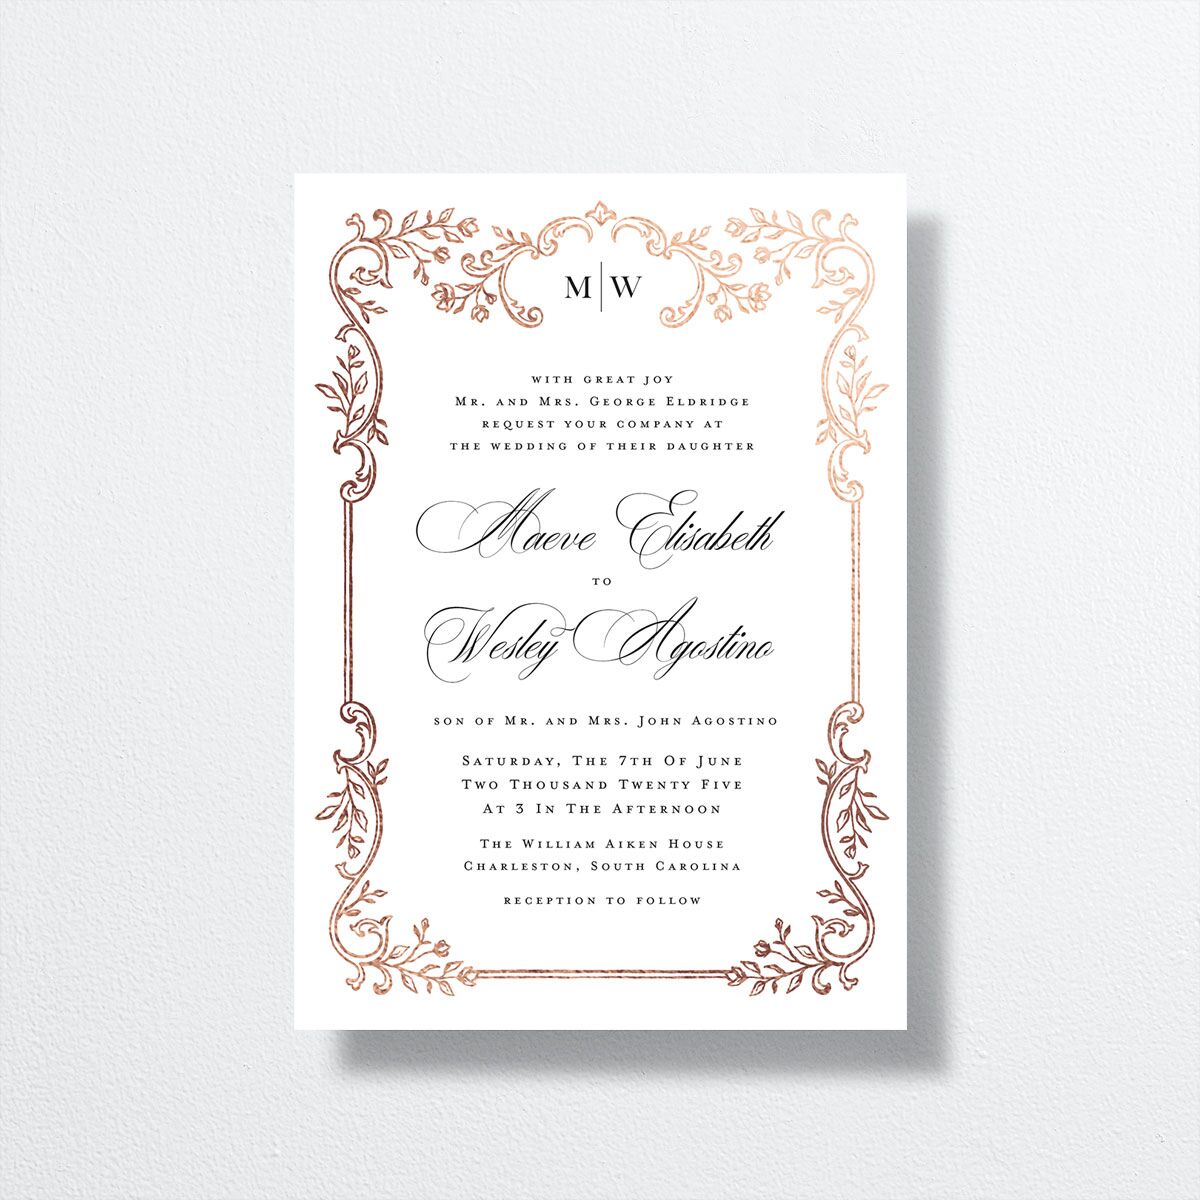 Opulences Wedding Invitations by Vera Wang front in white